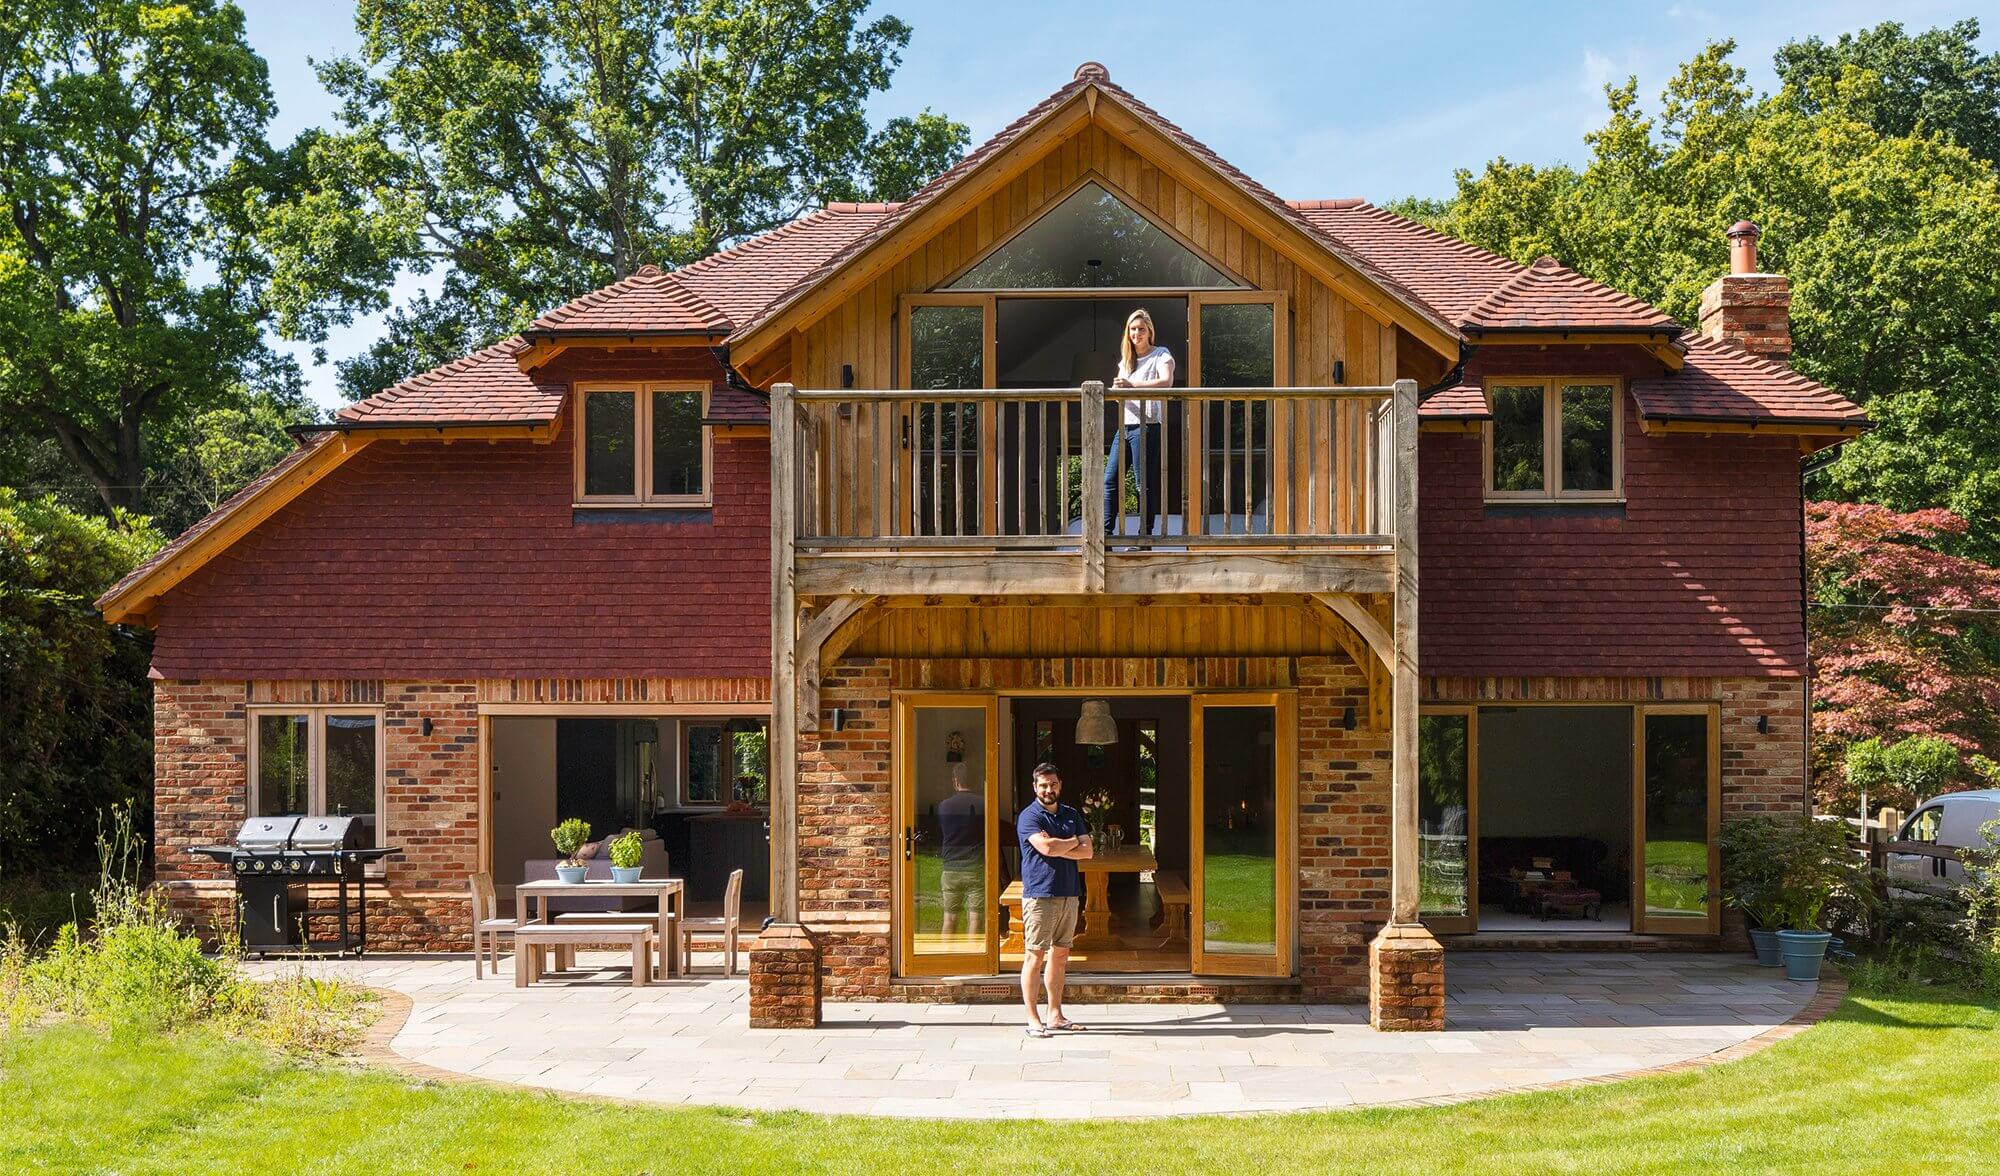 Lee & Amber Wilmot at their timber frame home in West Sussex